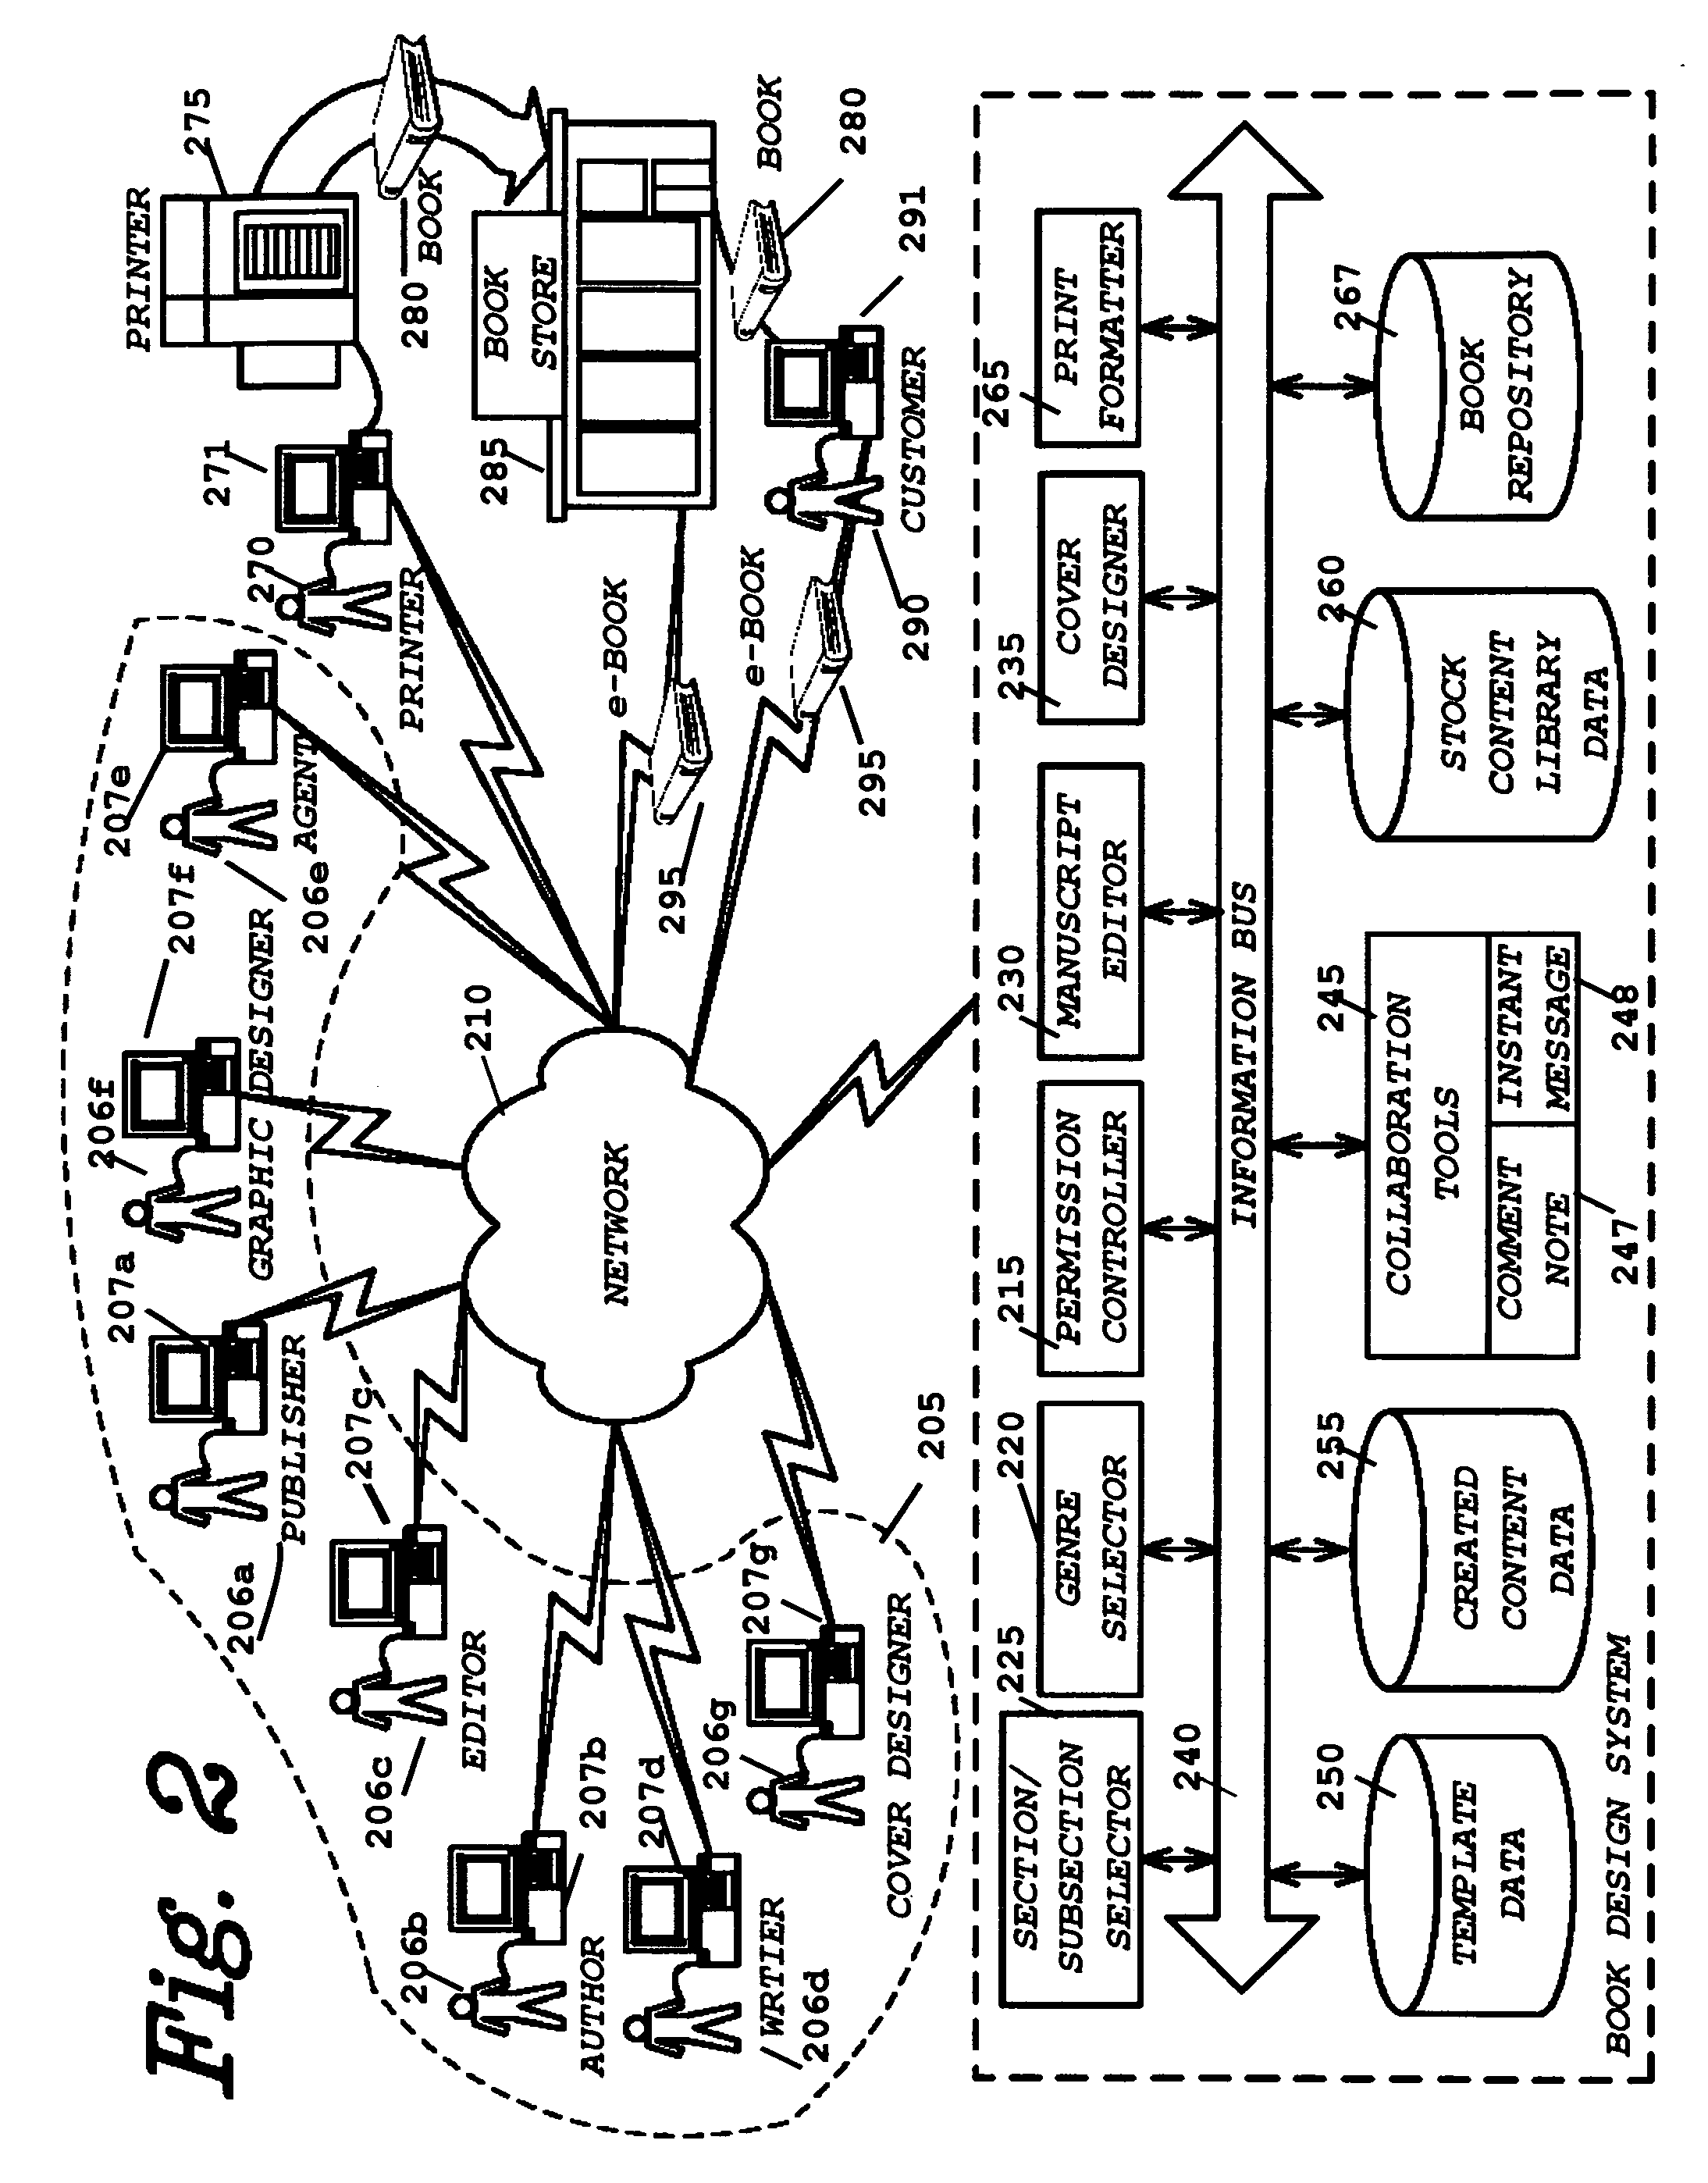 Publishing system and method that enables users to collaboratively create, professional appearing digital publications for "On-Demand" distribution in a variety of media that includes digital printing